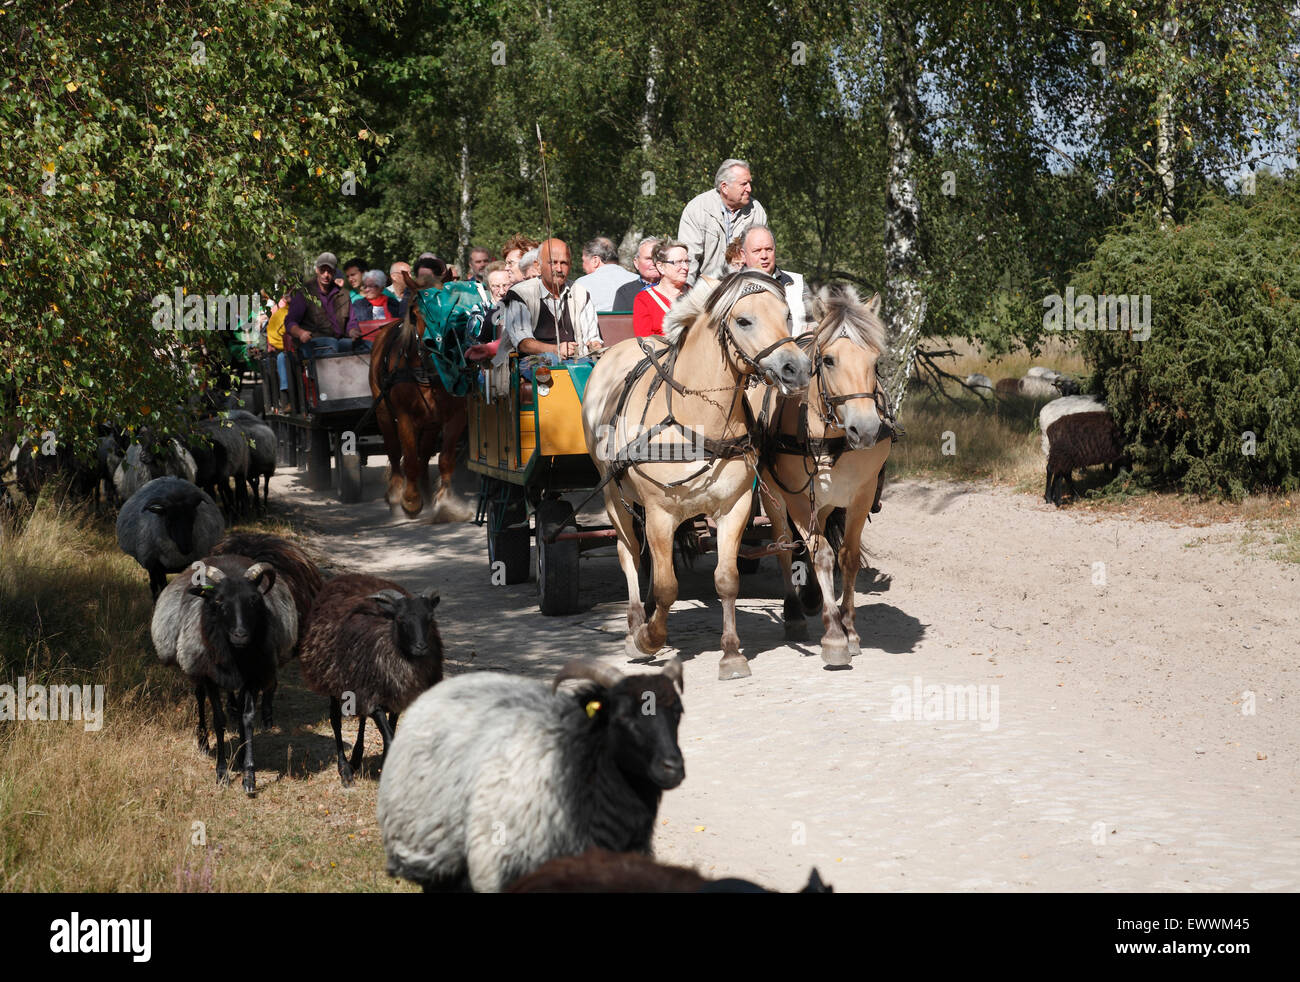 Carriage with tourists near Wilsede, Lueneburger Heath, Lower Saxony, Germany, Europe Stock Photo